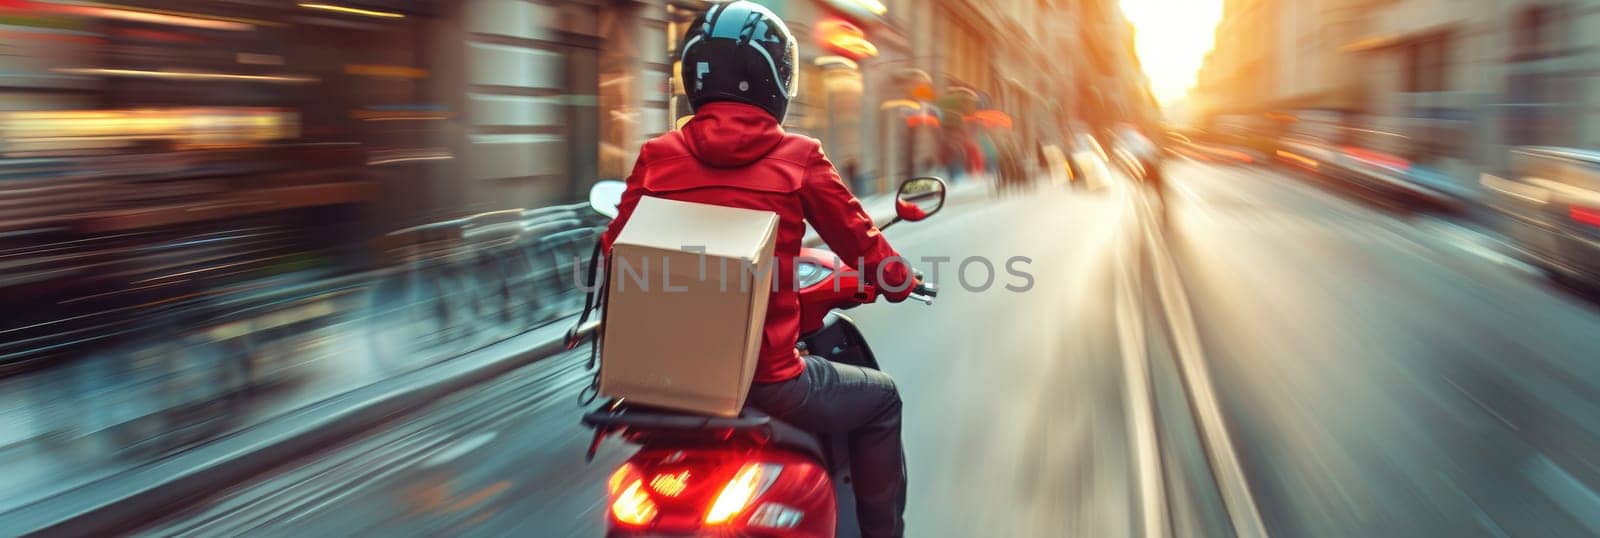 A man on a motorcycle is riding down a street with a box on his back by AI generated image by wichayada